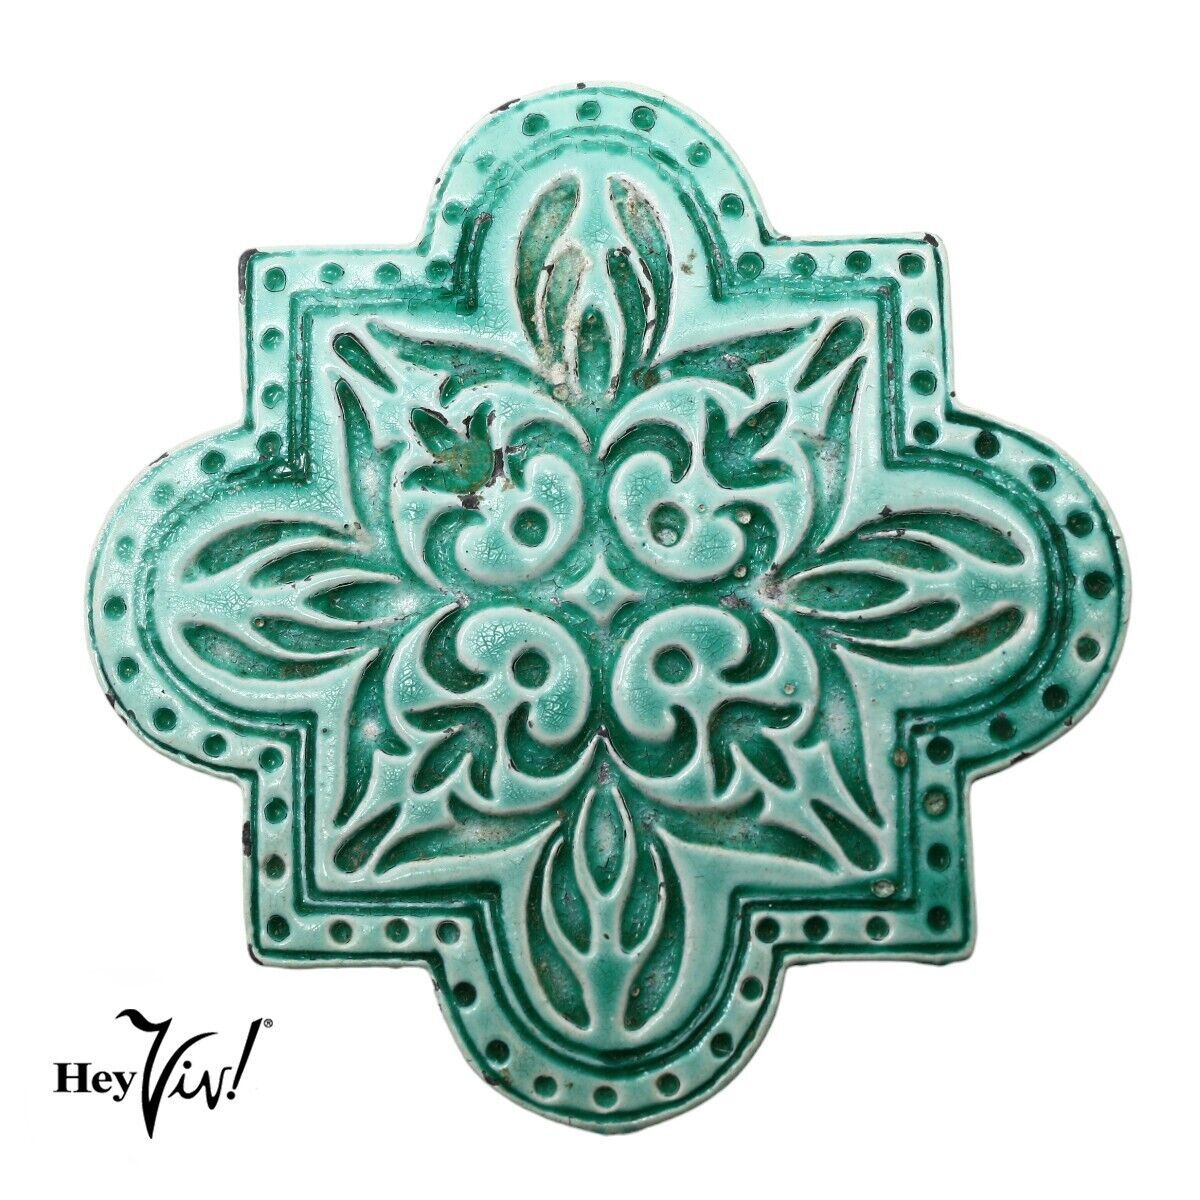 Primary image for Vintage Turquoise Glazed Ceramic Wall Tile Pin Brooch 2 1/4" Across - Hey Viv